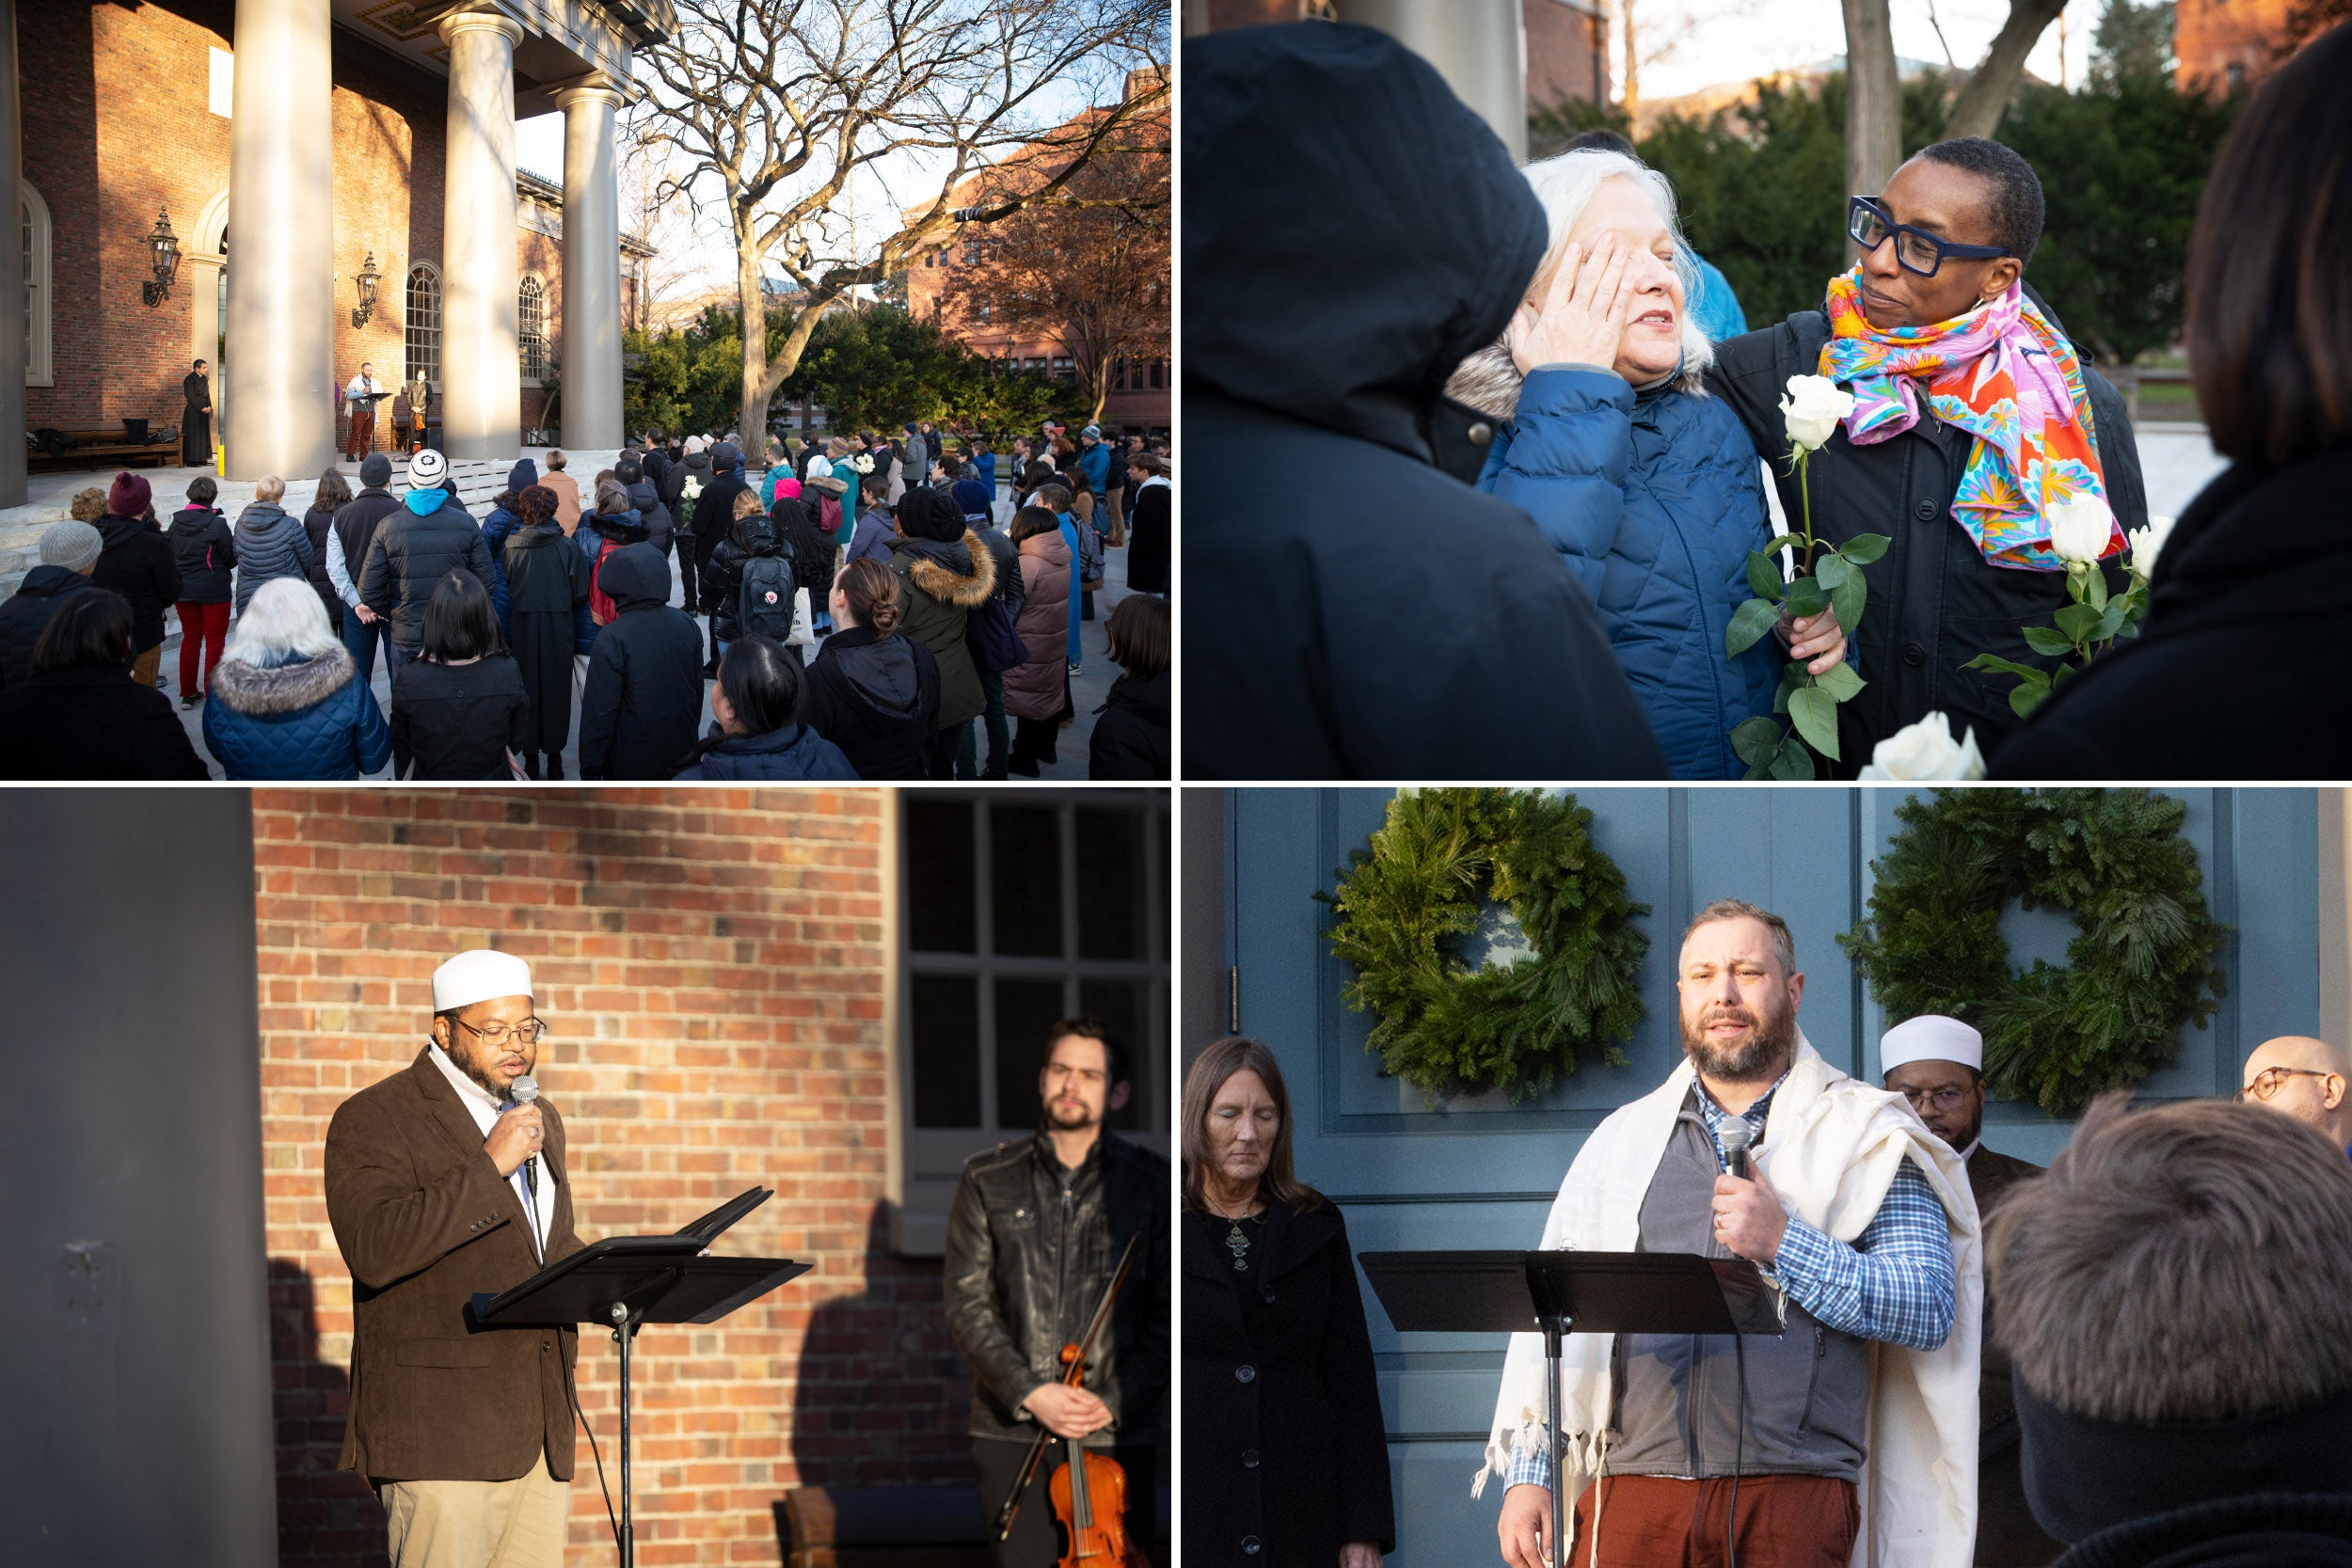 People gather in front of Memorial Church for an Israel-Hamas war vigil; Clauding Gay comforts a grieving attendee; Rabbi Getzel Davis and Imam Khalil Abdur-Rashid lead prayers.